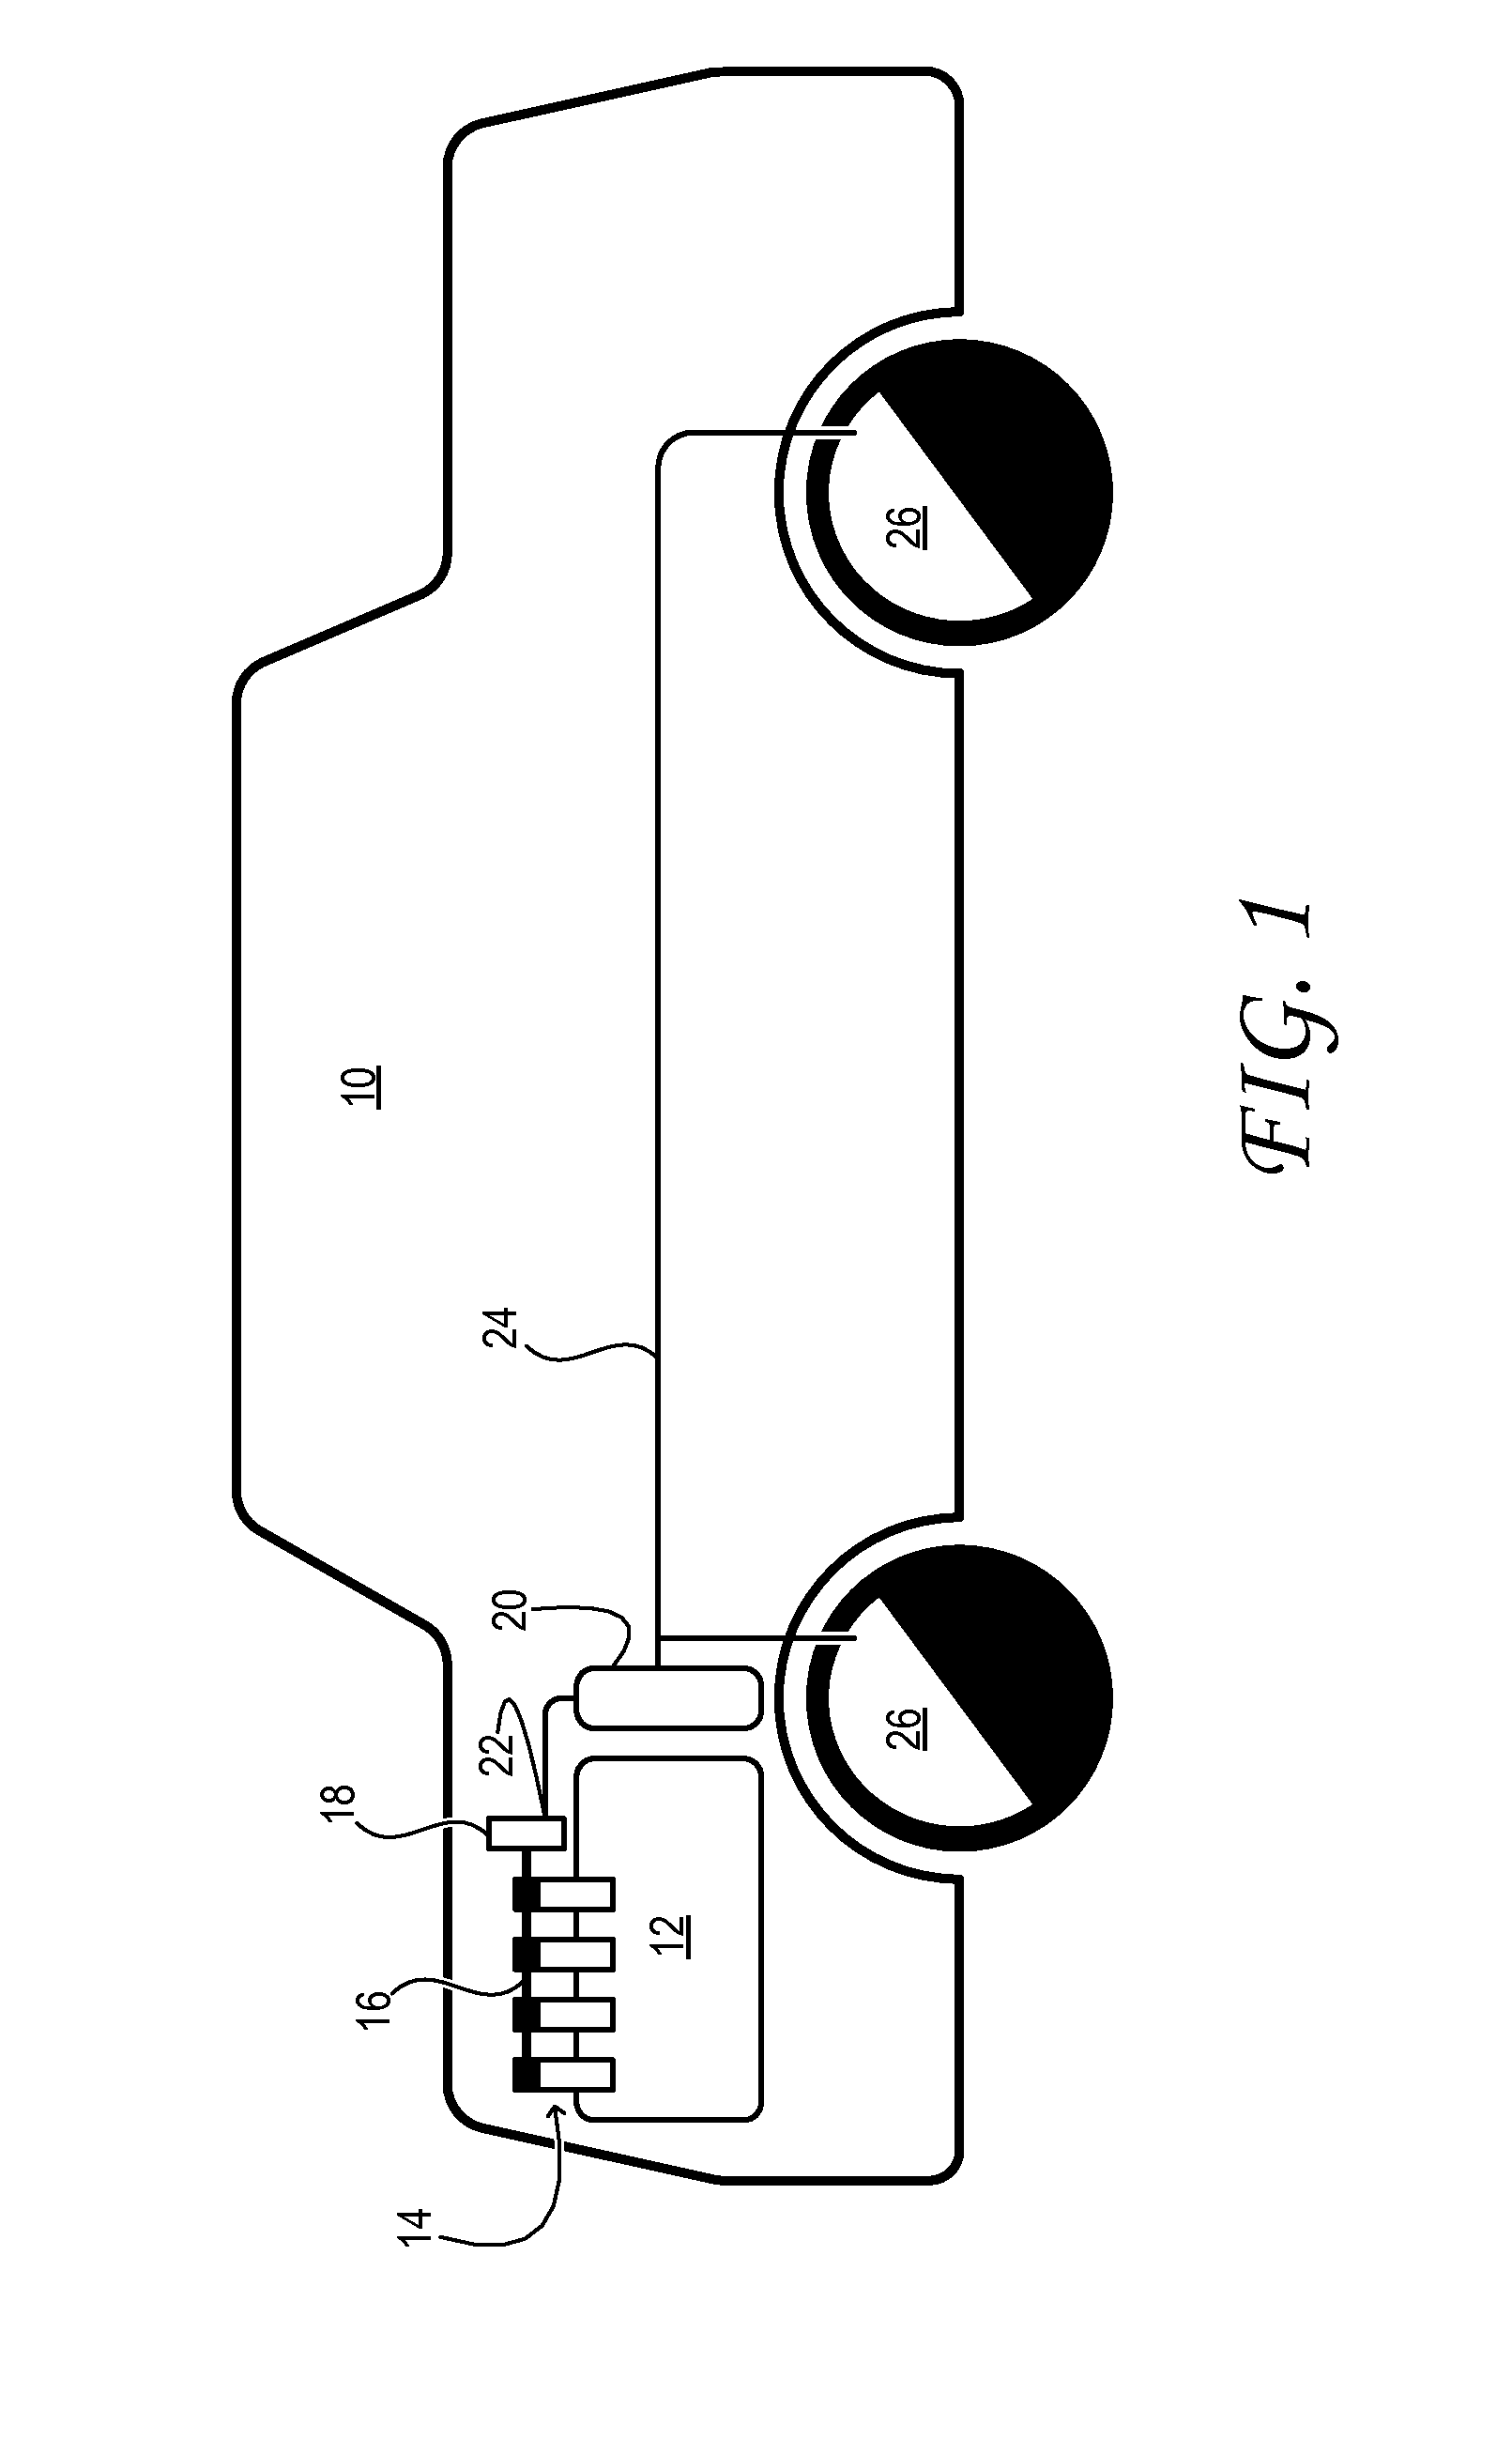 Vacuum pump with rotor-stator positioning to provide non-return